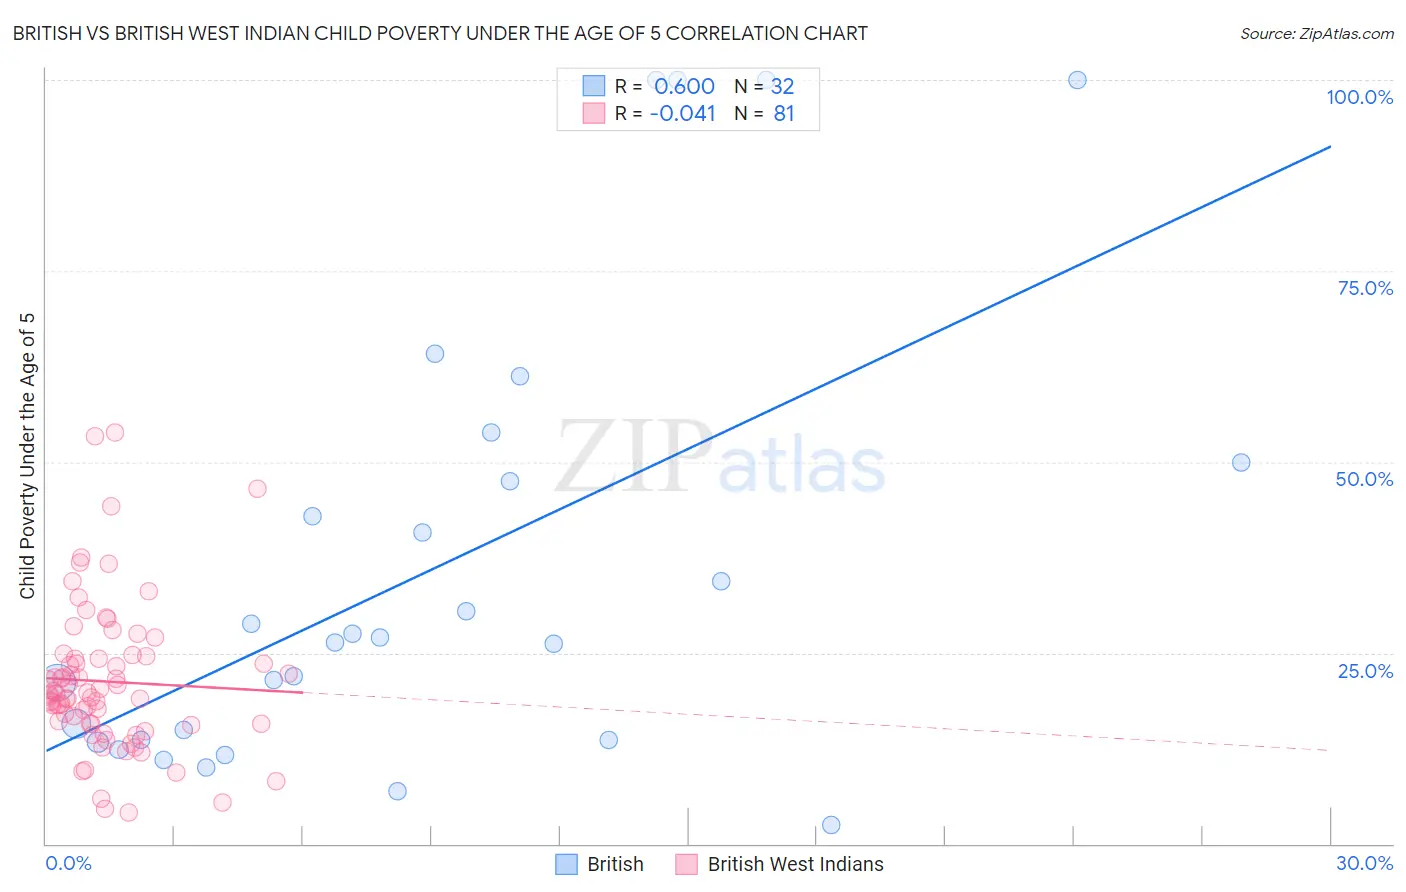 British vs British West Indian Child Poverty Under the Age of 5